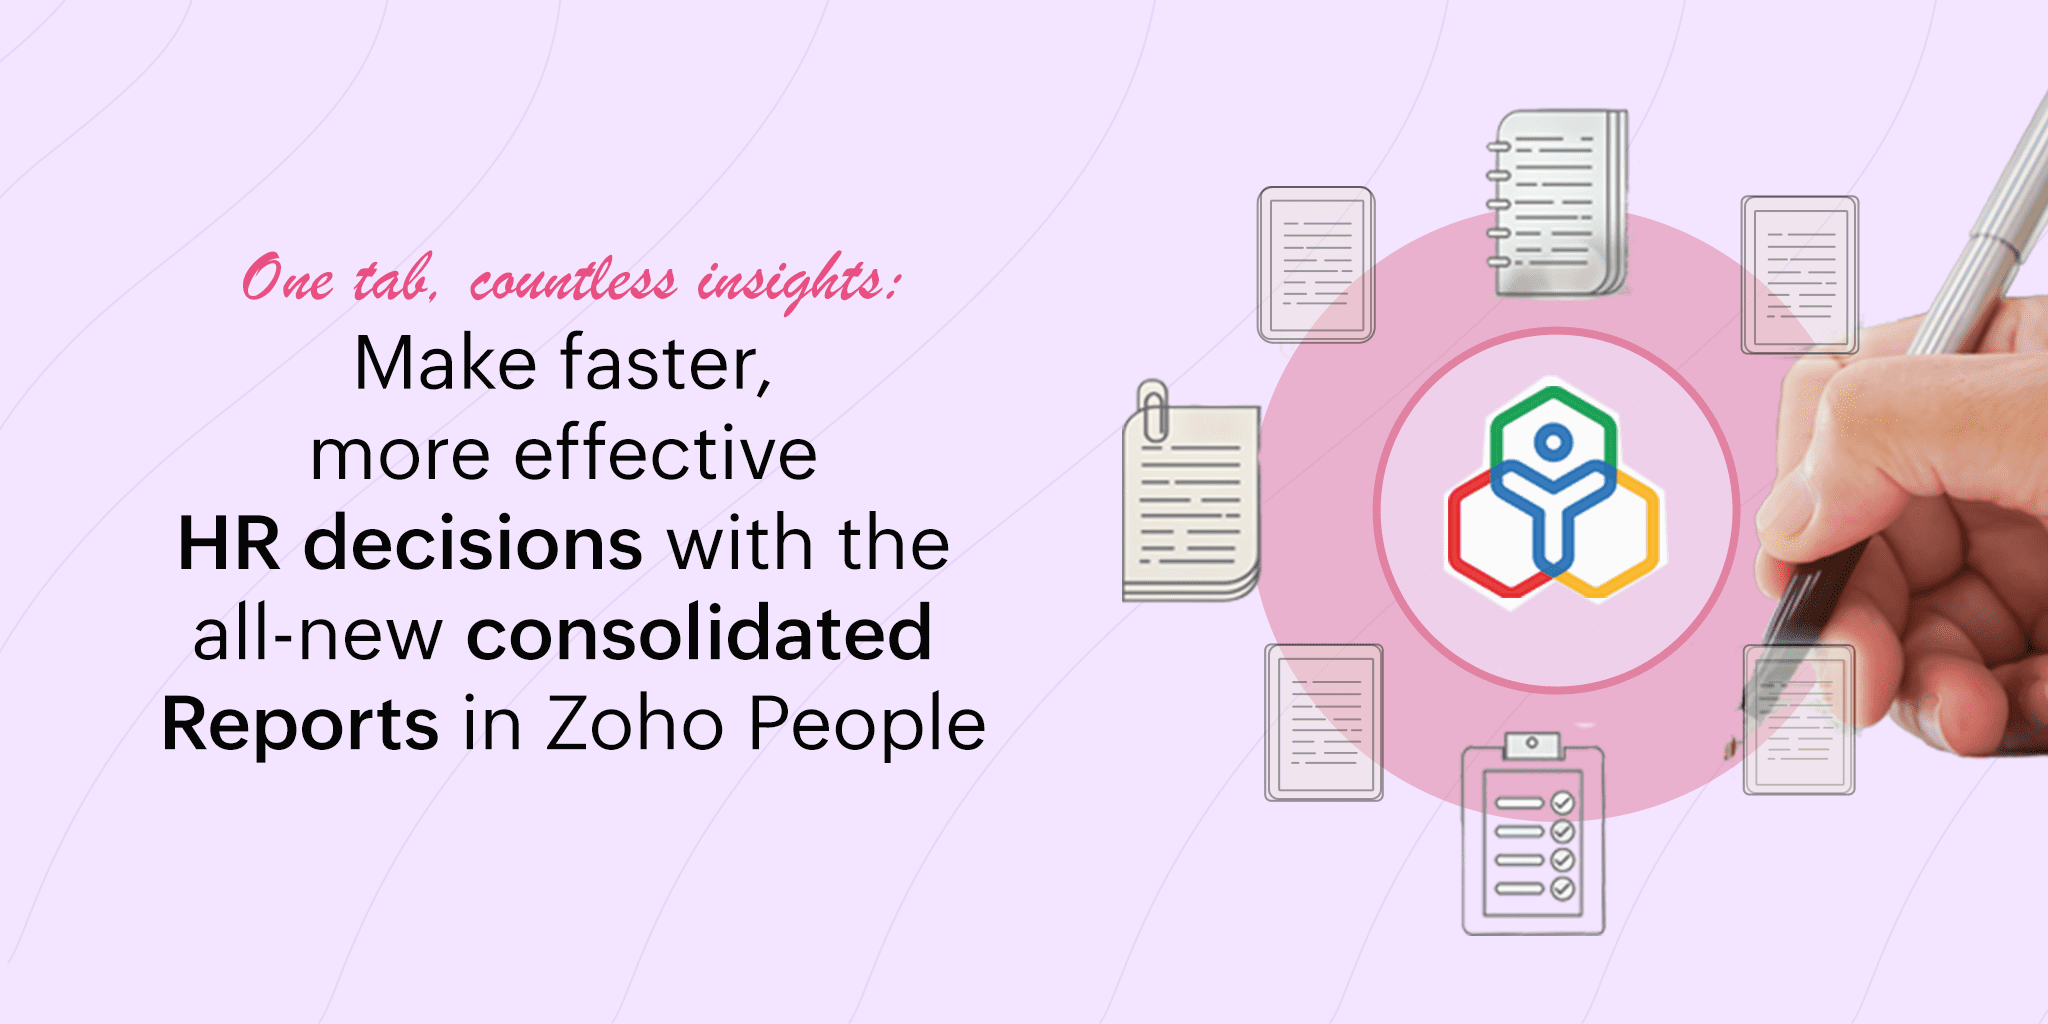 Make faster, more effective HR decisions with the all-new consolidated Reports in Zoho People